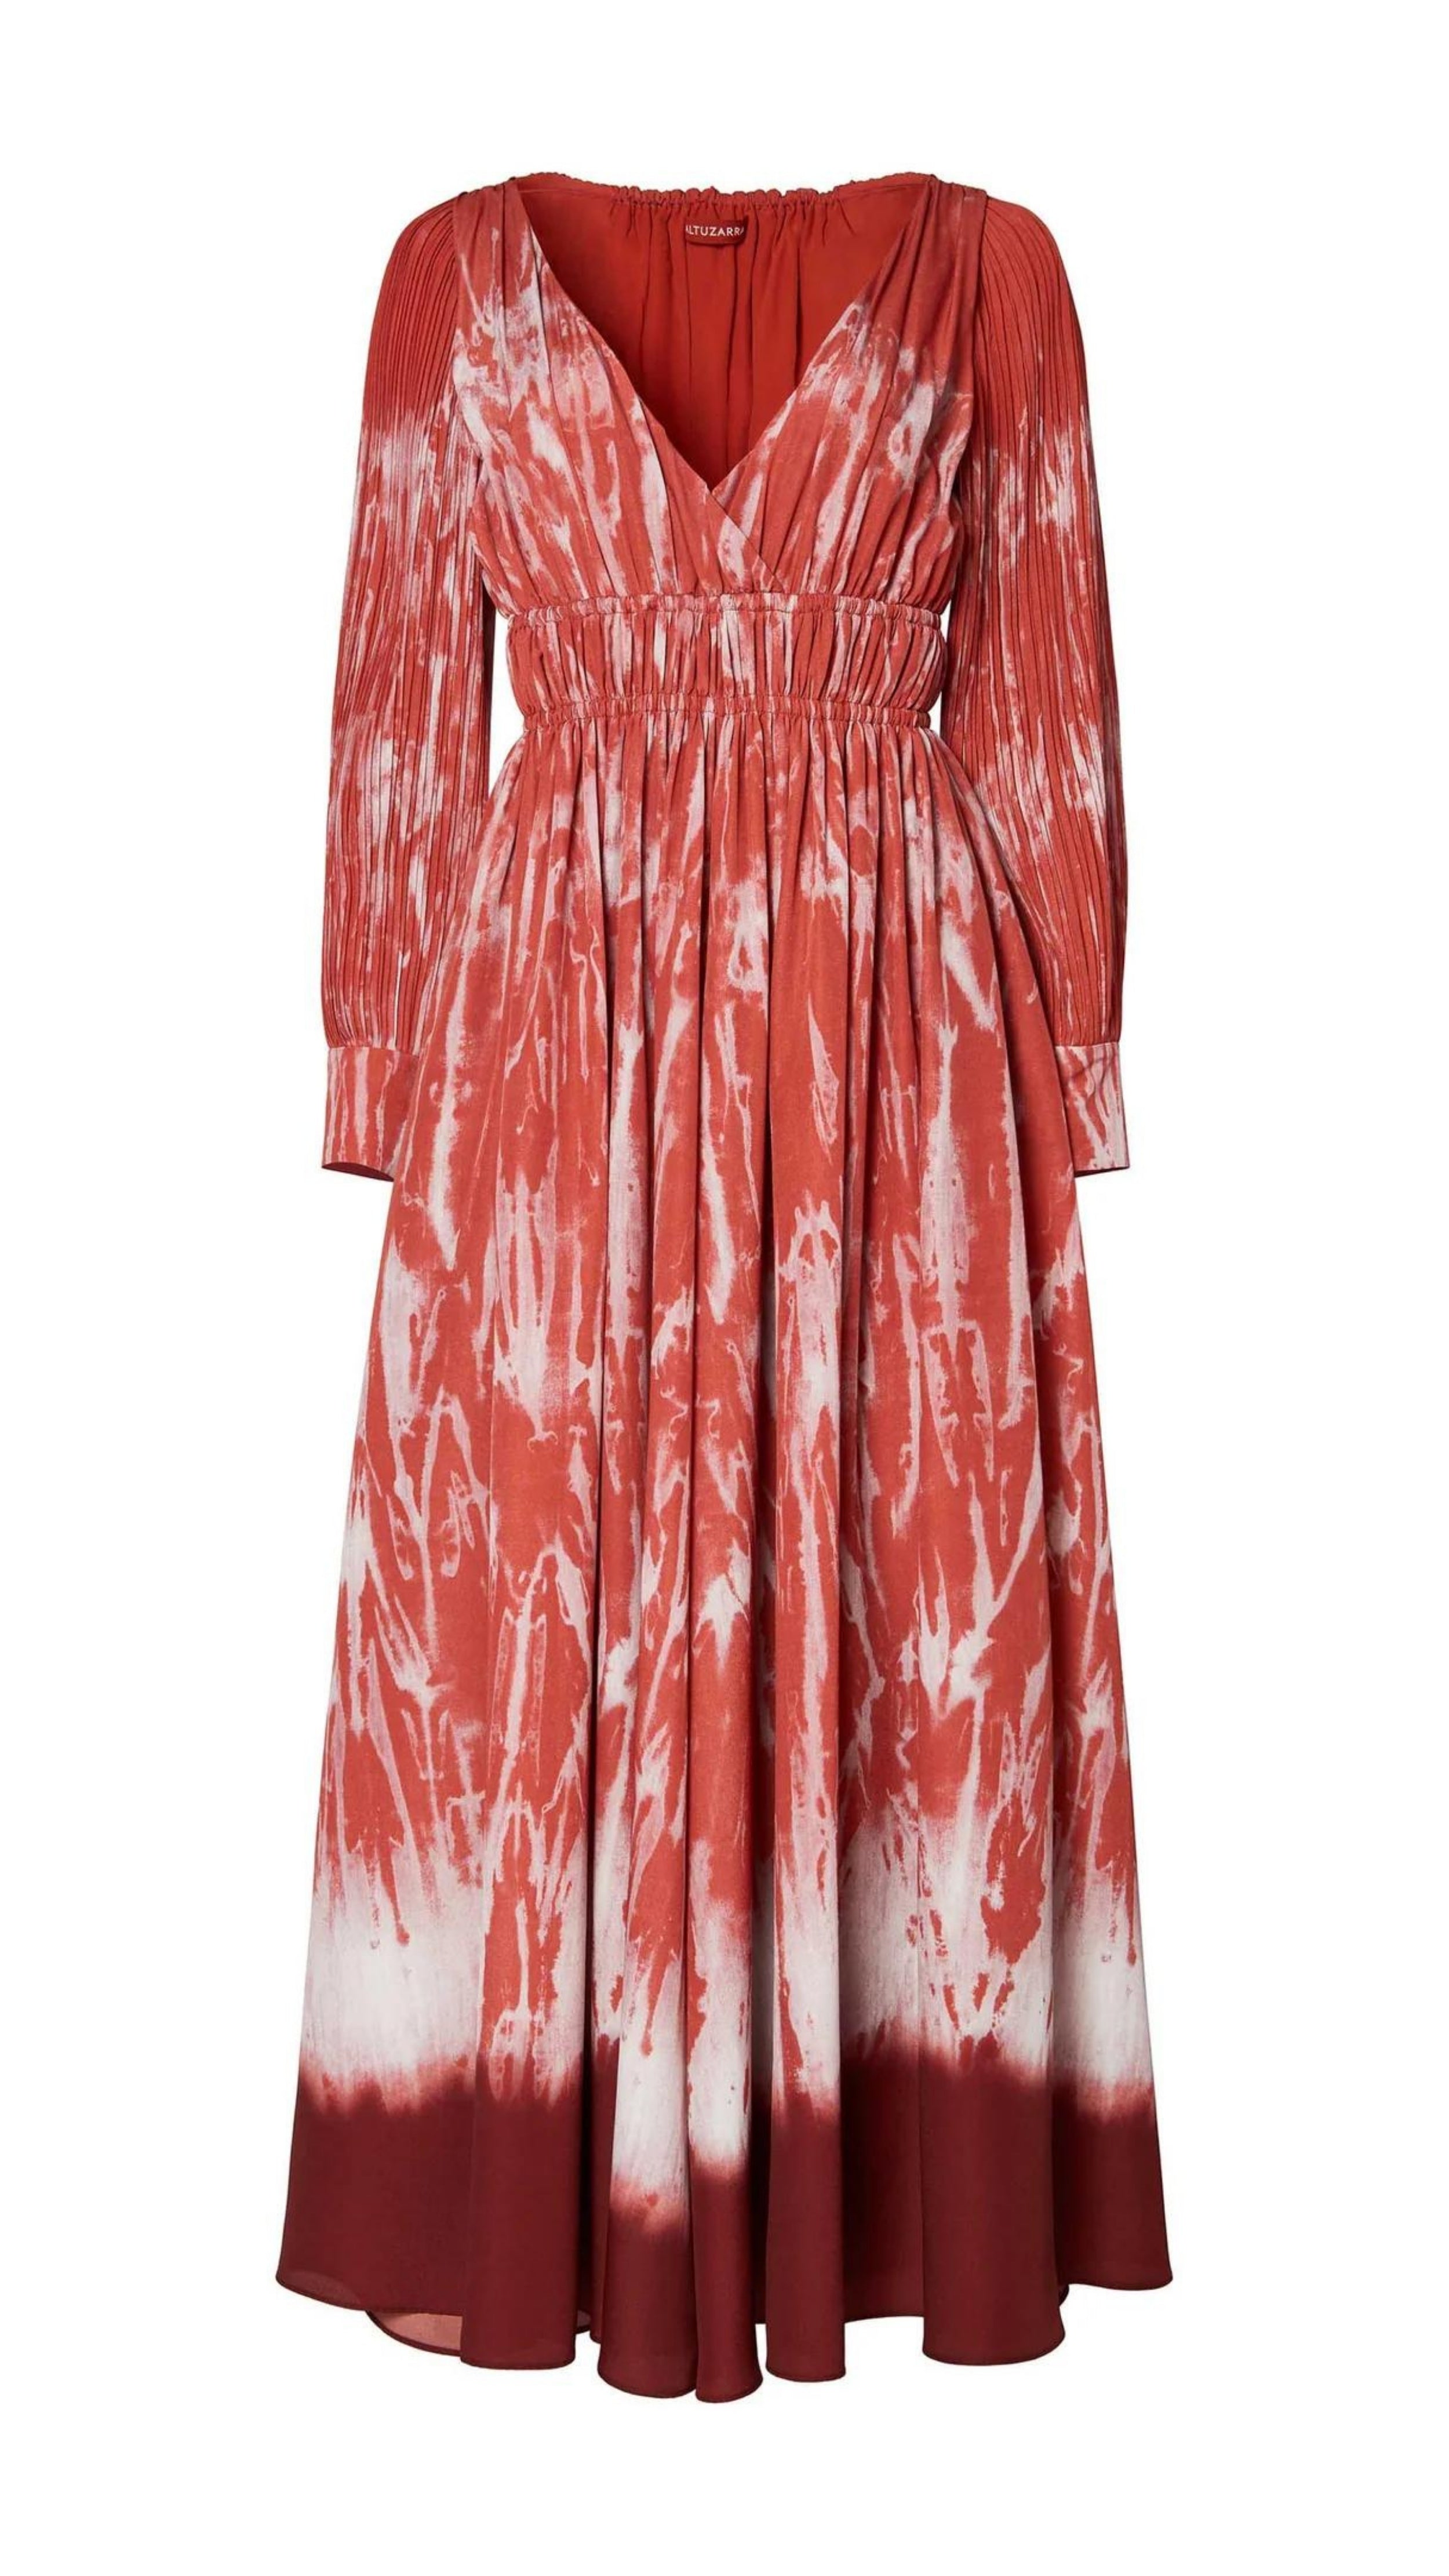 Altuzarra Kathleen Dress The Kathleen Dress is a statement dress using Altuzarra&#39;s renowned Shibori dyeing technique in shades of red, cranberry and orange. It has a maxi silhouette, a V-neckline, a ruched waist, long pleated sleeves, and button-fastening cuffs. Product photo flat.